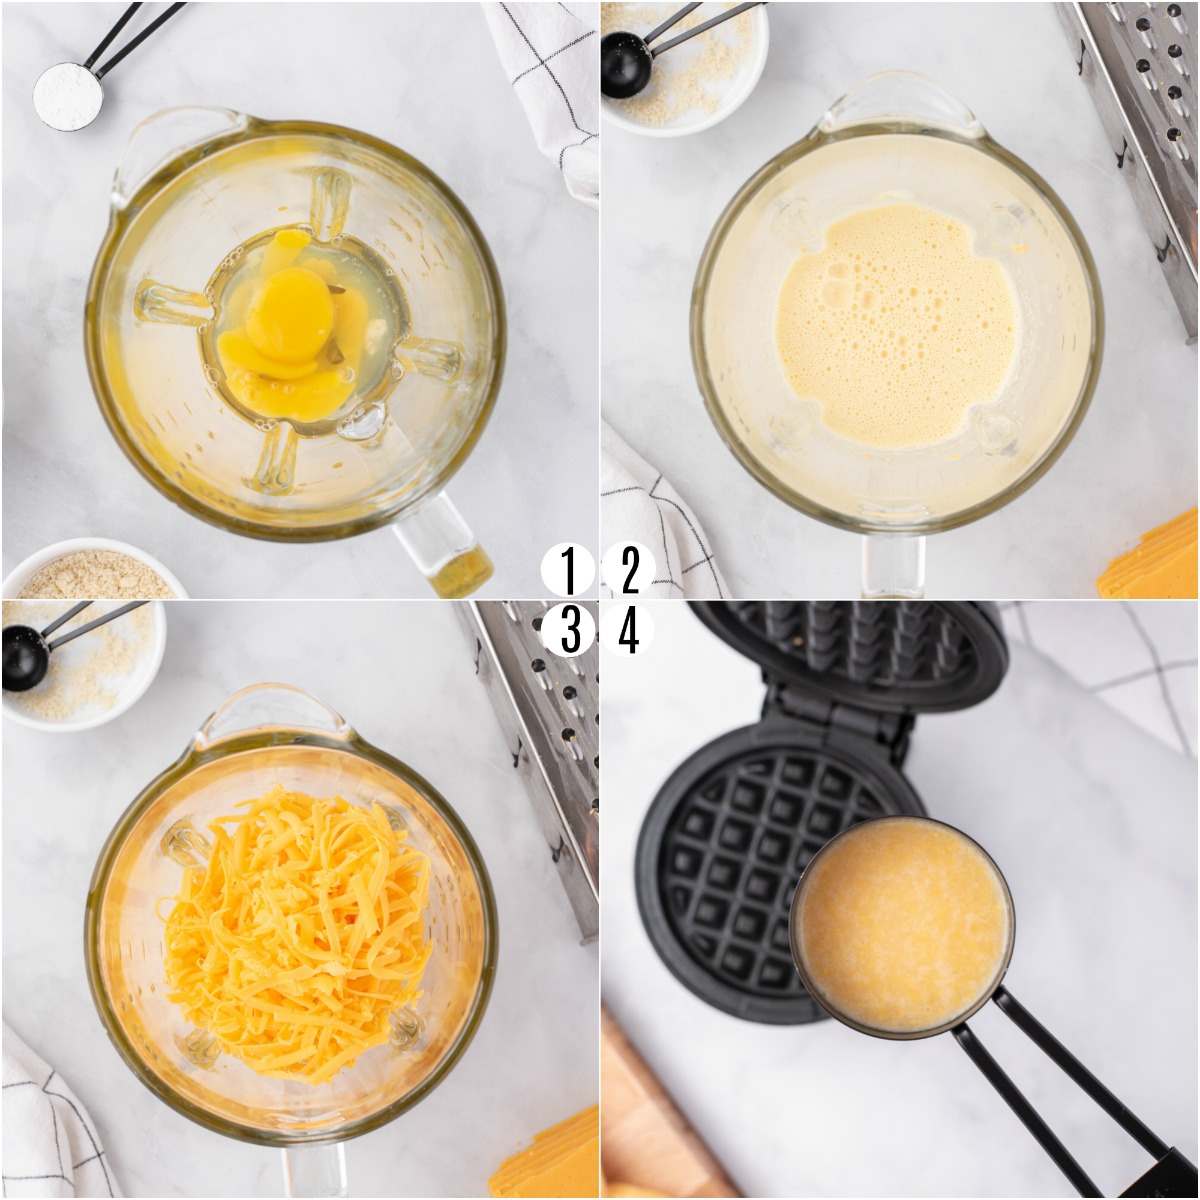 Step by step photos showing how to make chaffles.